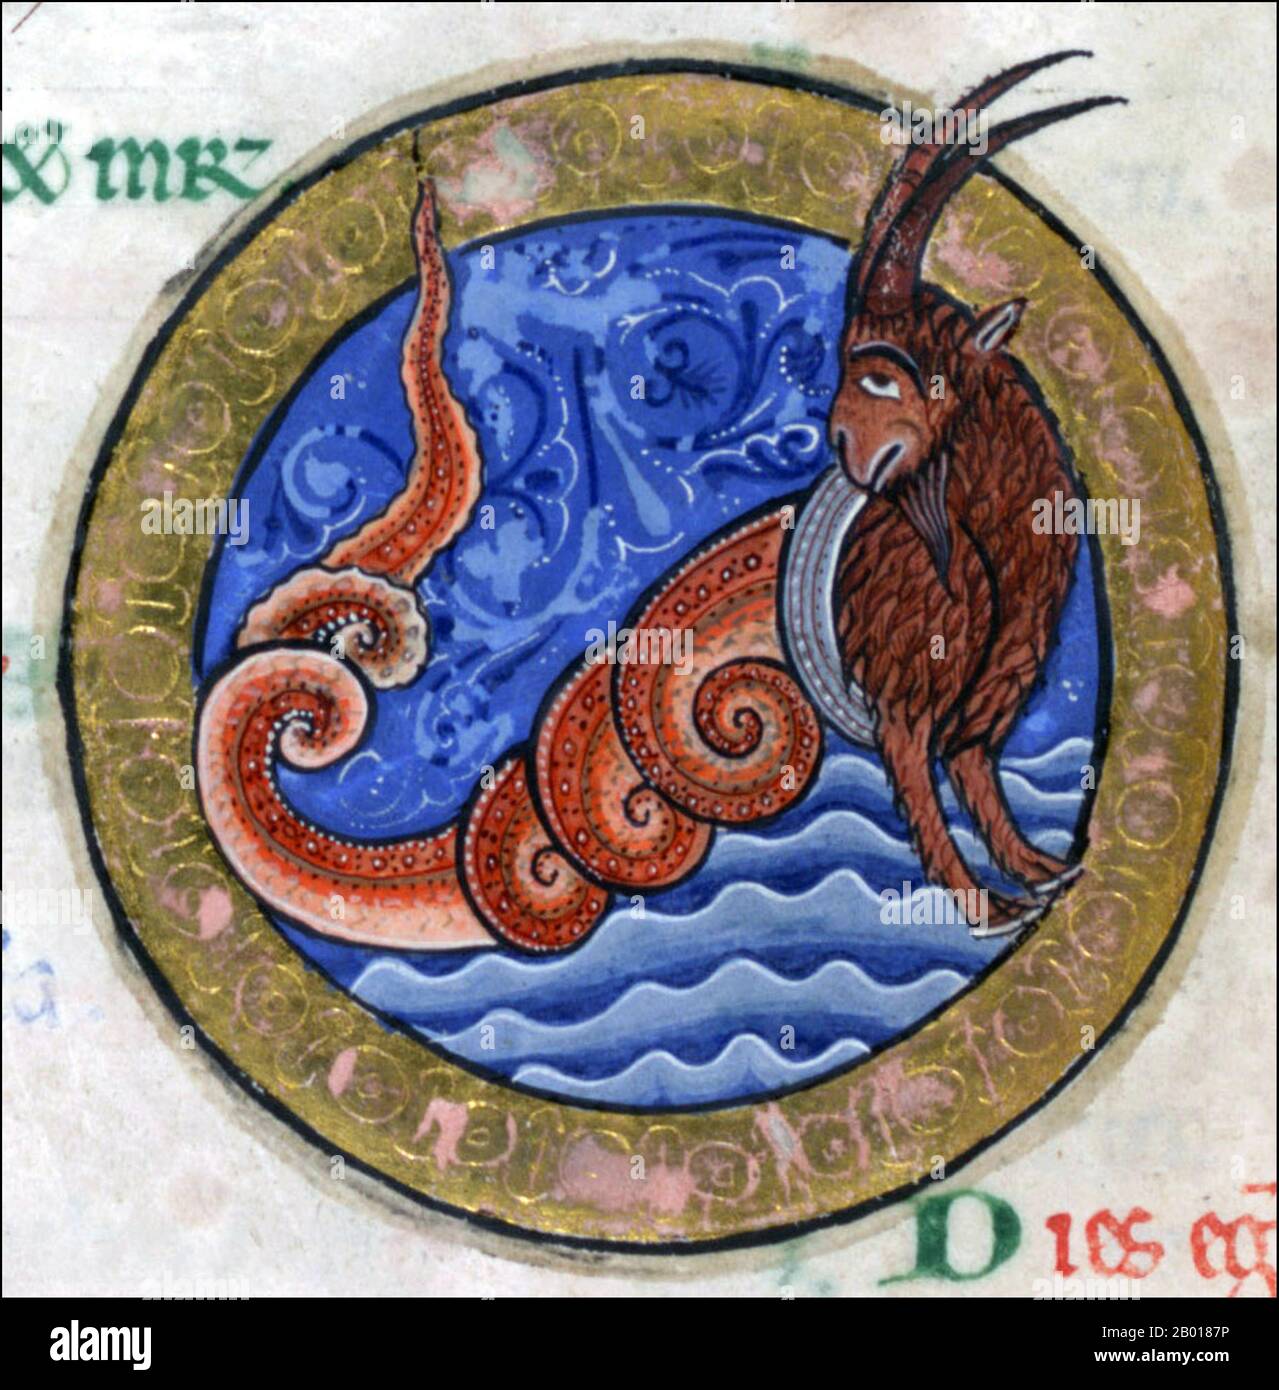 England: Zodiacal symbol for Capricorn as represented in the Hunterian Psalter, c. 1170.  The Hunterian Psalter (or York Psalter) is an illuminated manuscript of the 12th century. It was produced in England some time around 1170, and is considered a striking example of Romanesque book art. The work is part of the collection of the Glasgow University Library, which acquired the book in 1807. It derives its colloquial name, the 'Hunterian Psalter', from having been part of the collection of 18th century Scottish anatomist and book collector William Hunter. Stock Photo